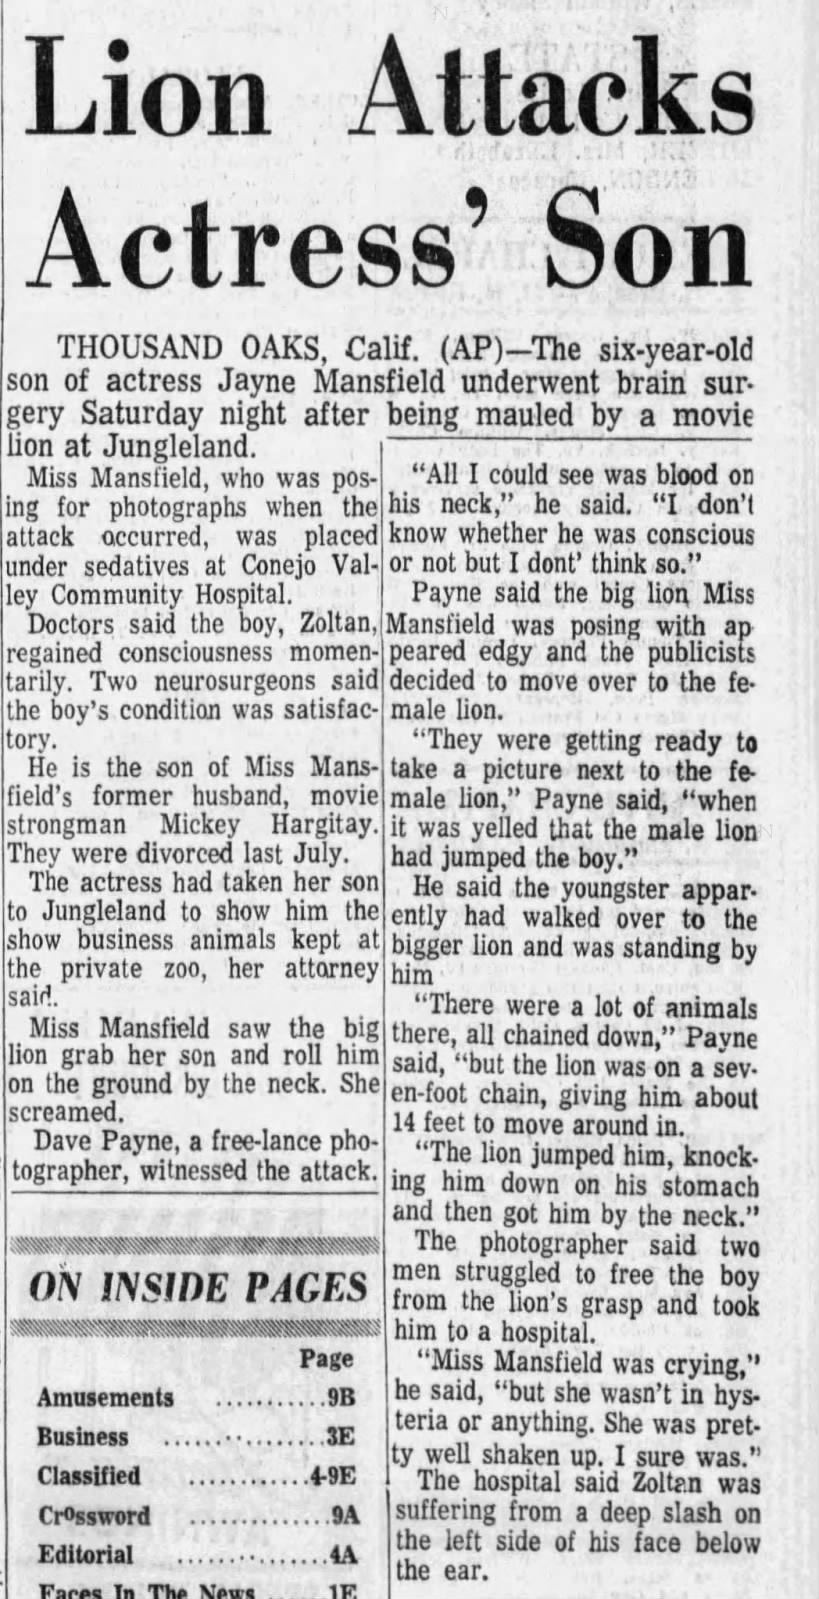 Lion Attack's Jayne Mansfield's son,